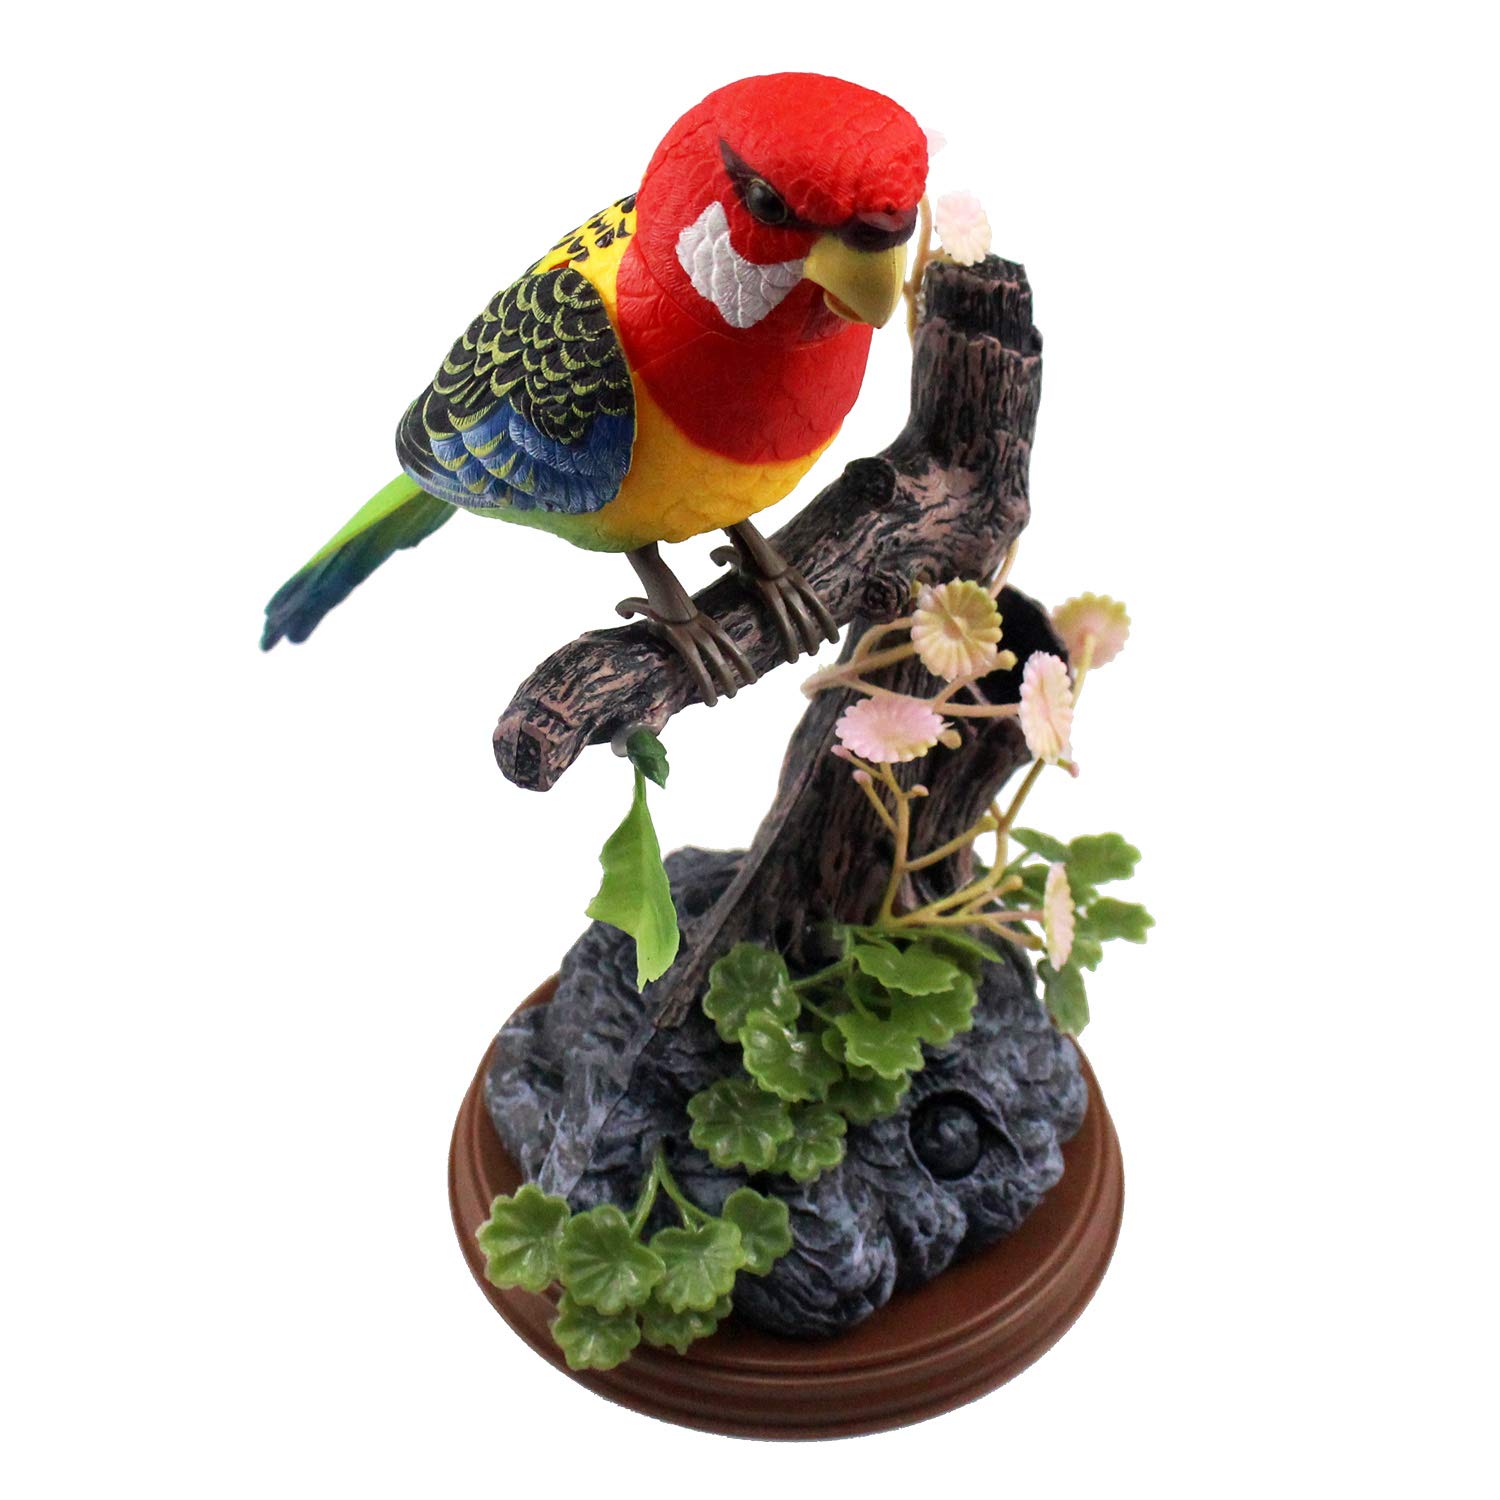 Tipmant Talking Parrots Birds Toys Electronic Animal Pets Office Home Room Decoration Recording Playback Function Kids Birthday Gifts (Single Bird)